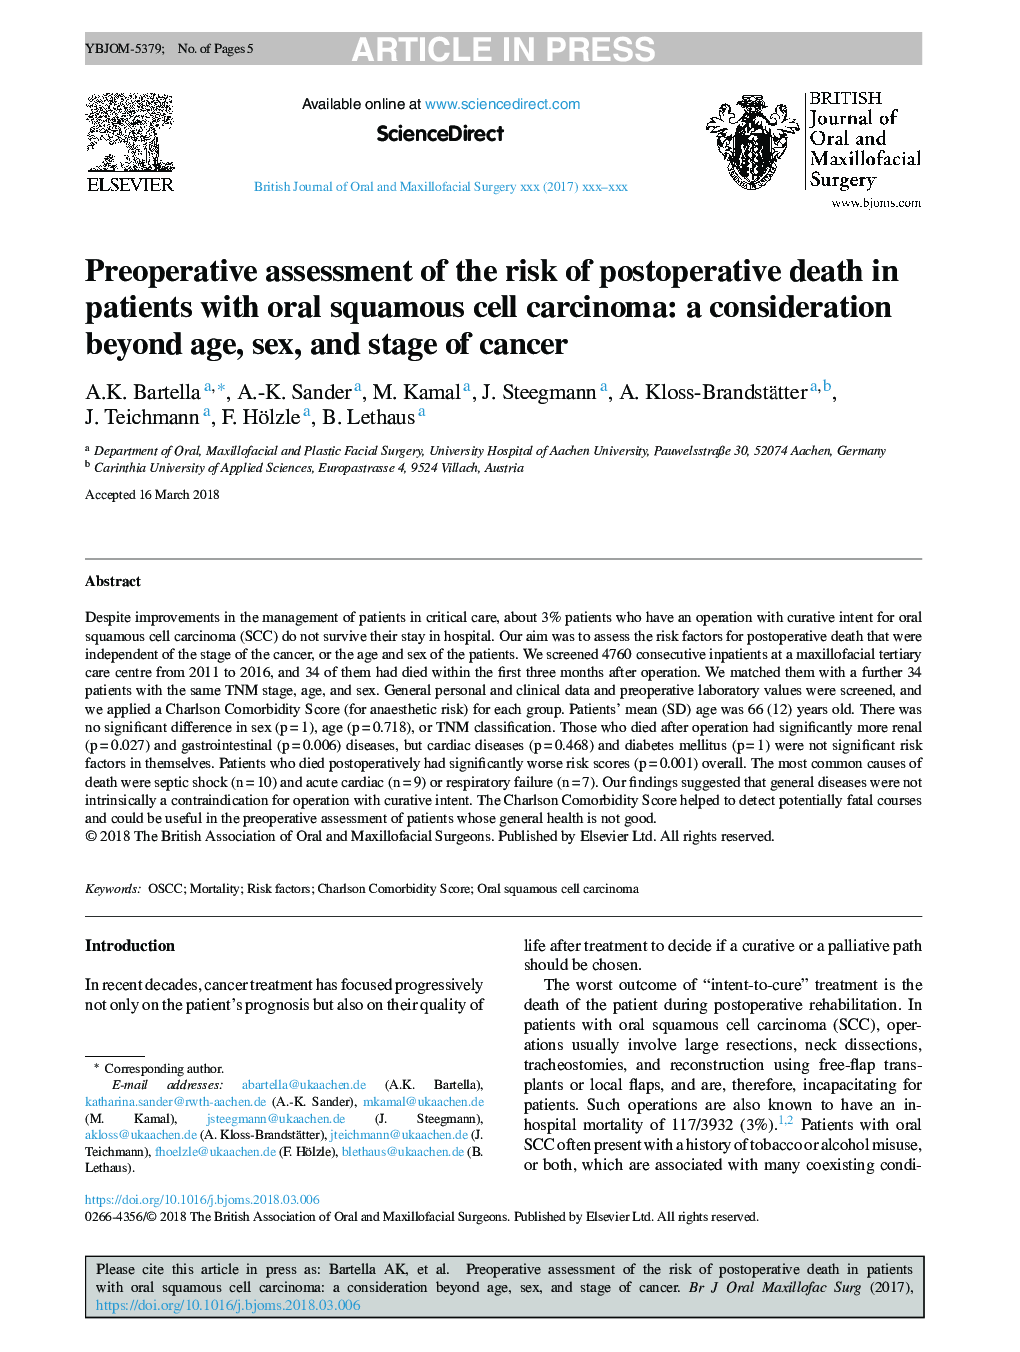 Preoperative assessment of the risk of postoperative death in patients with oral squamous cell carcinoma: a consideration beyond age, sex, and stage of cancer